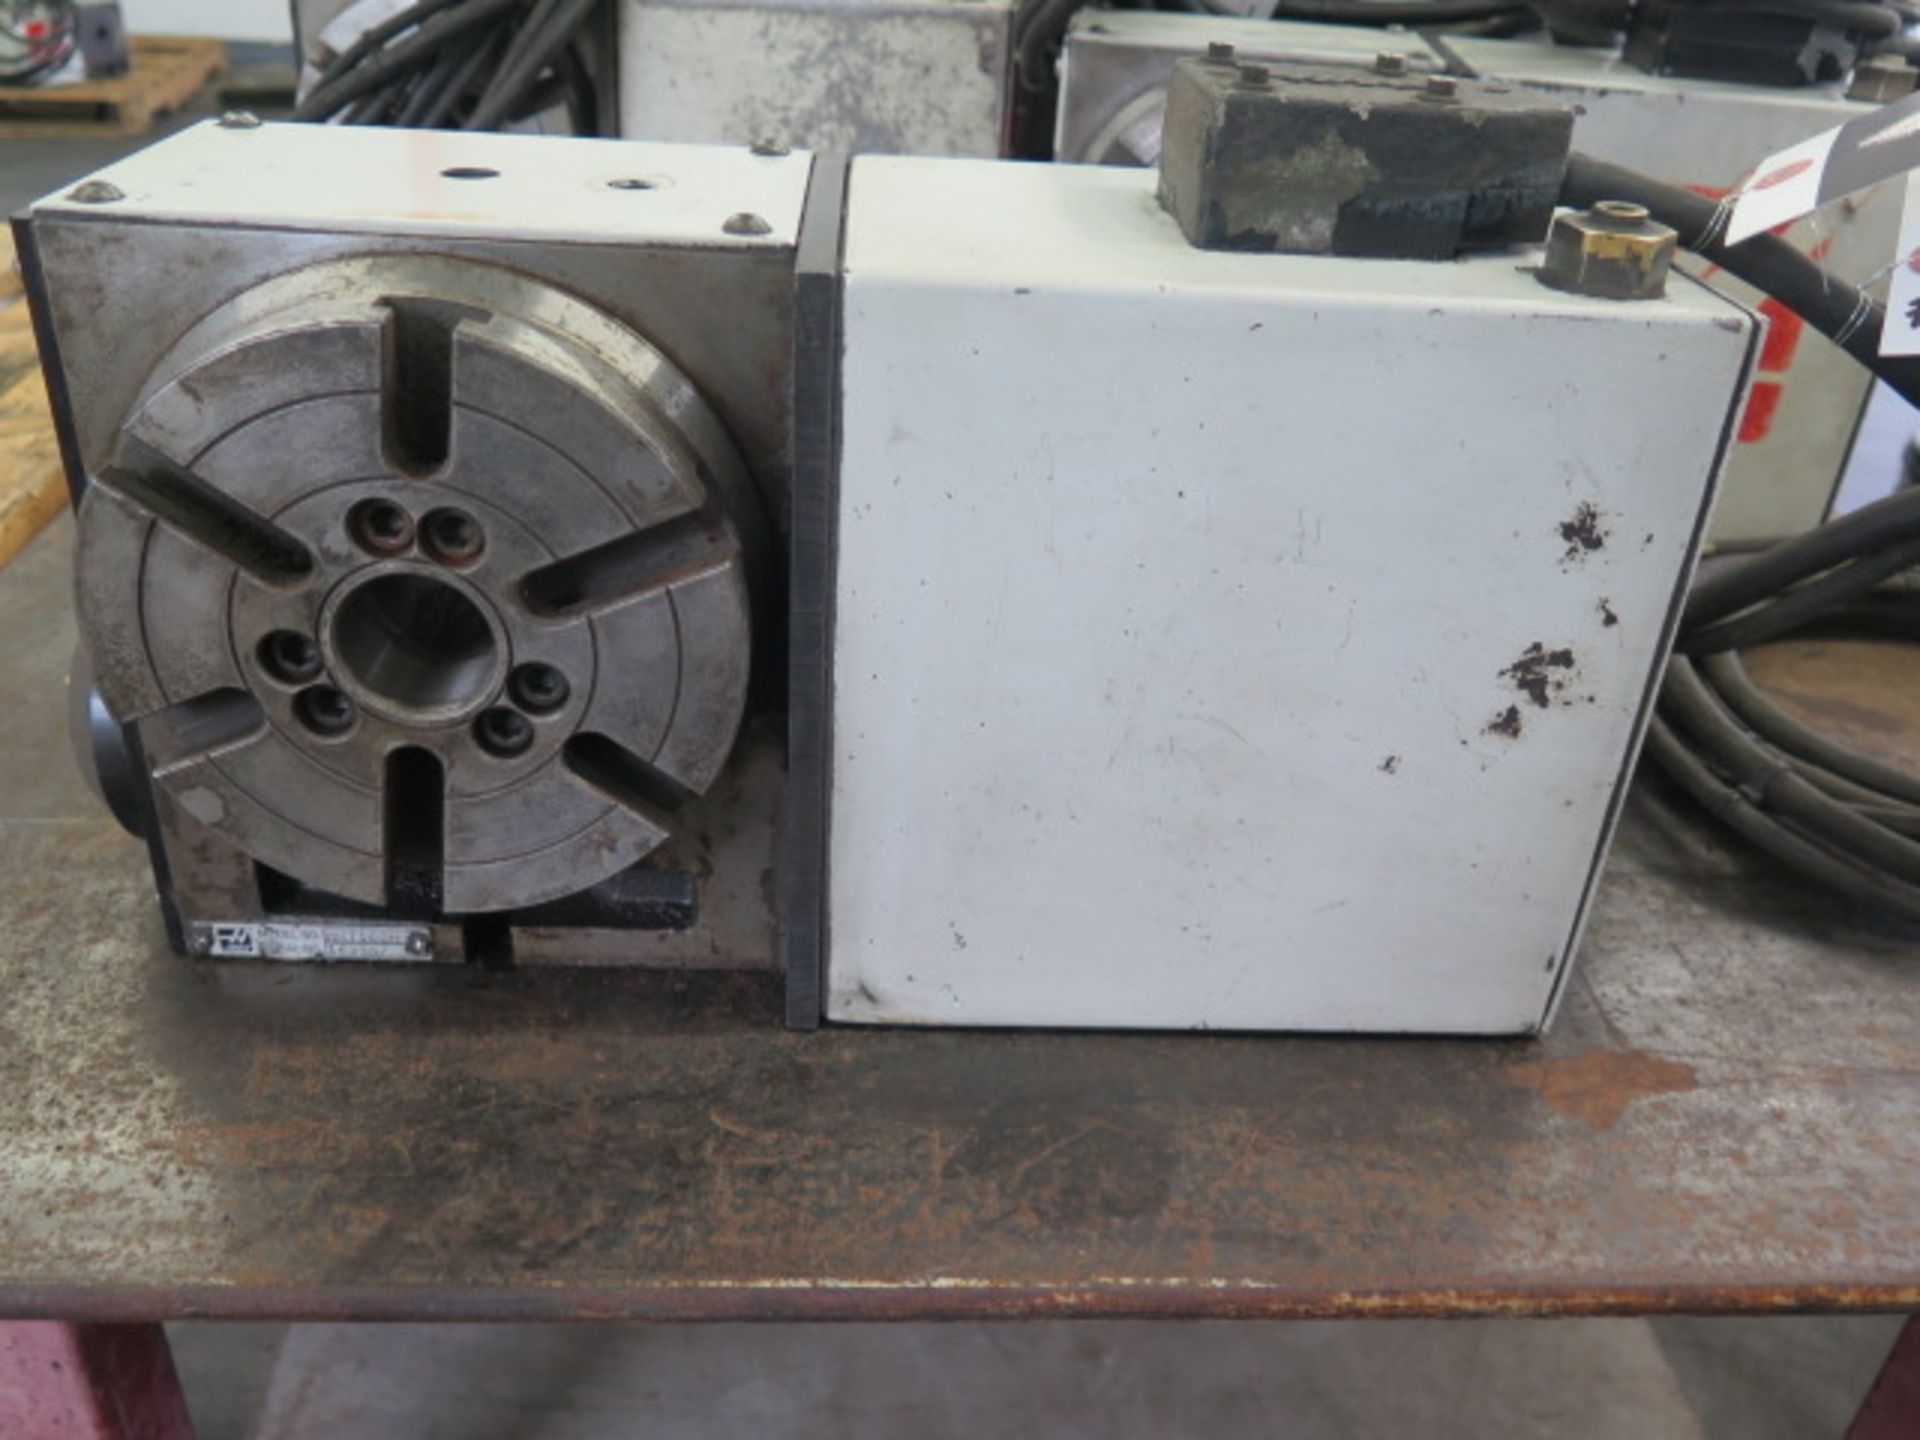 Haas HRT160H 6” 4th Axis Rotary Indexer s/n 163567 (Change Parameter #45 VALUE from “0” to “16384”)